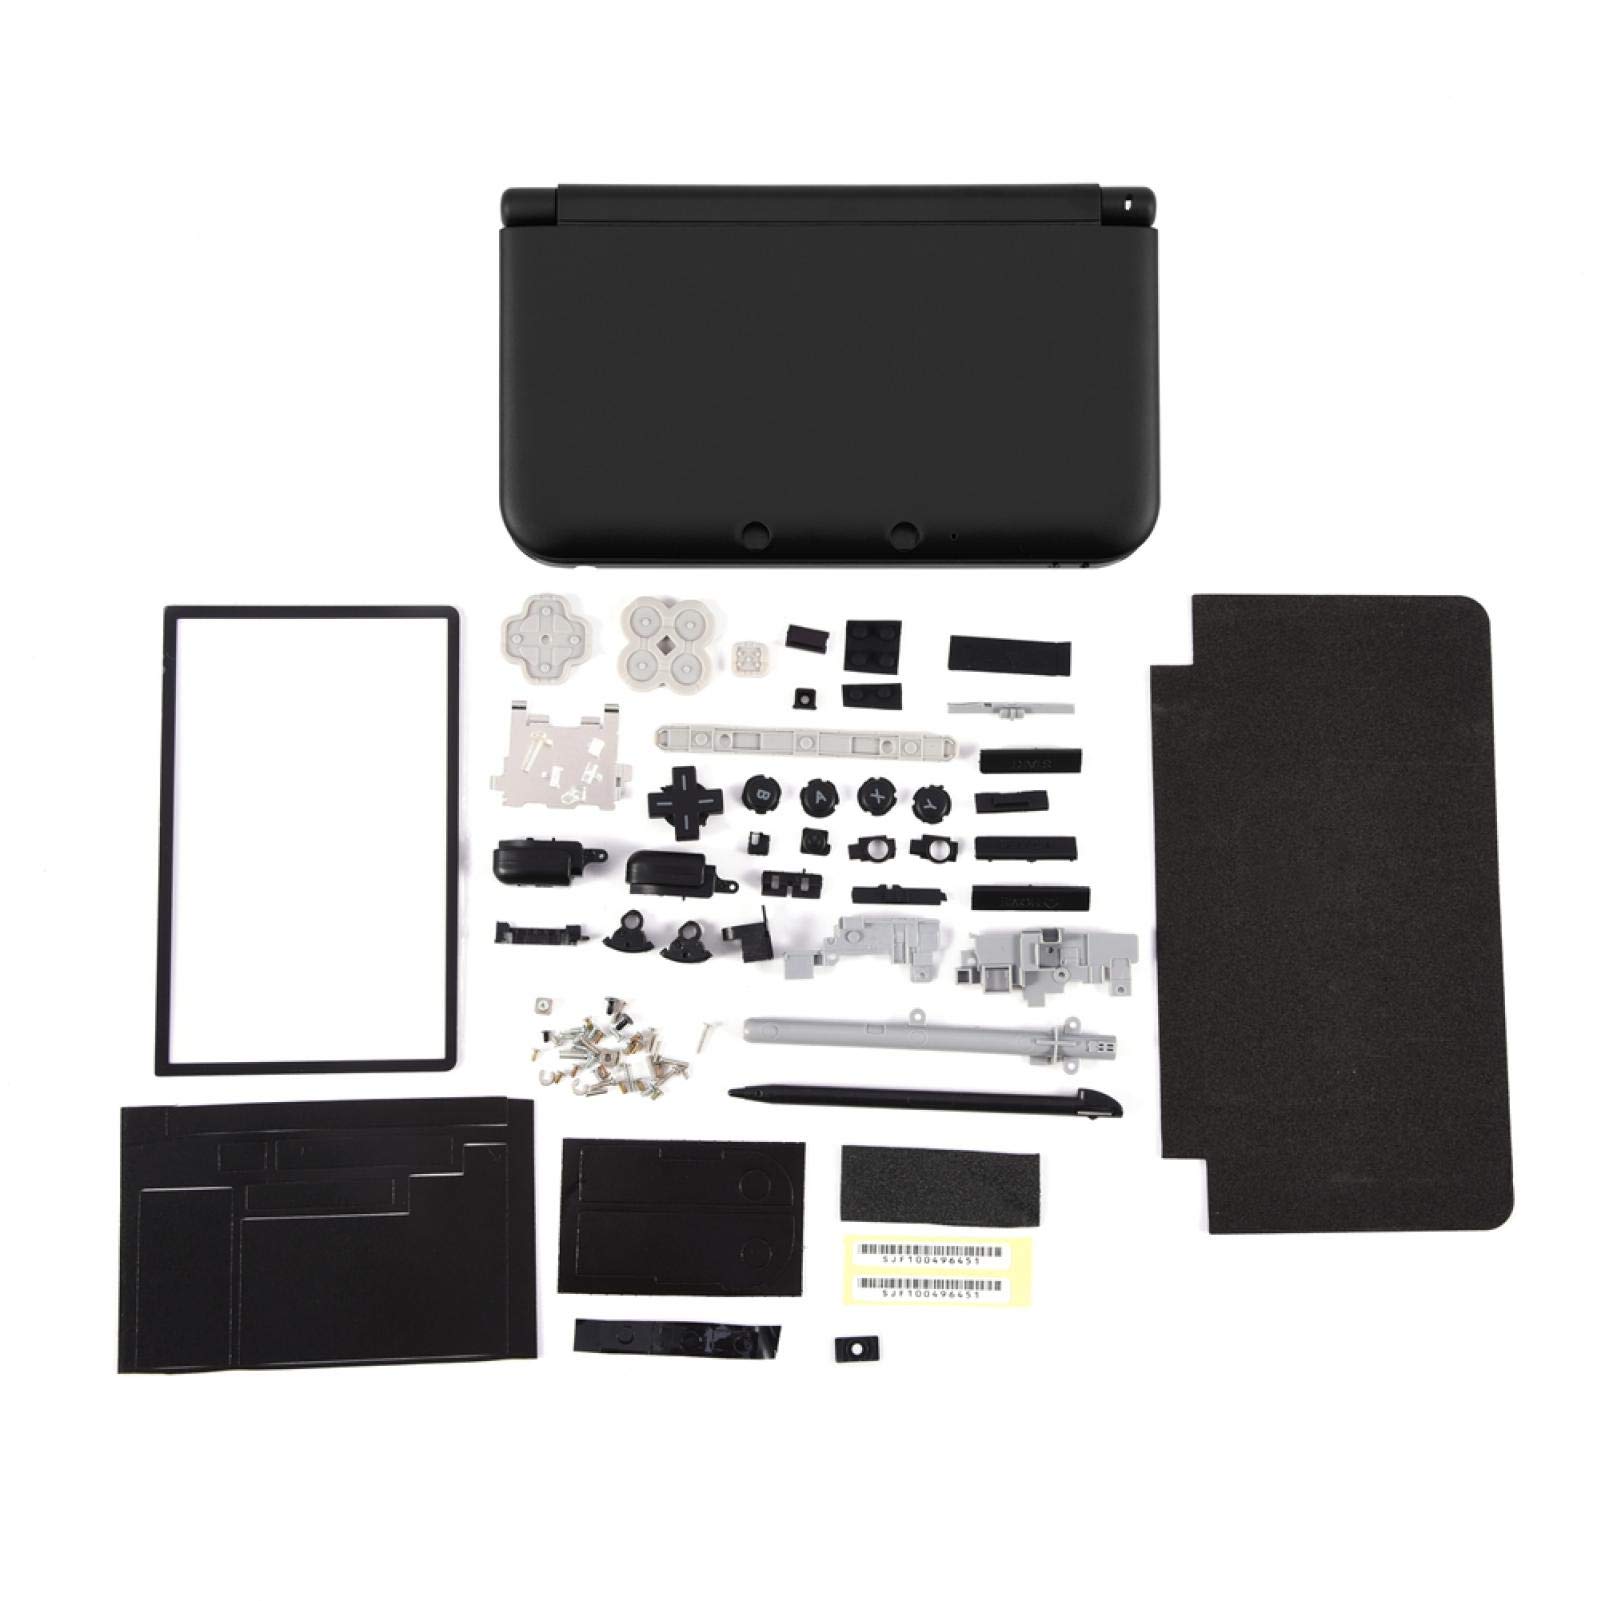 YUUGAA Case, Full Housing Case Cover Shell Repair Parts Complete Fix Replacement Kit für 3DS XL(Schwarz)